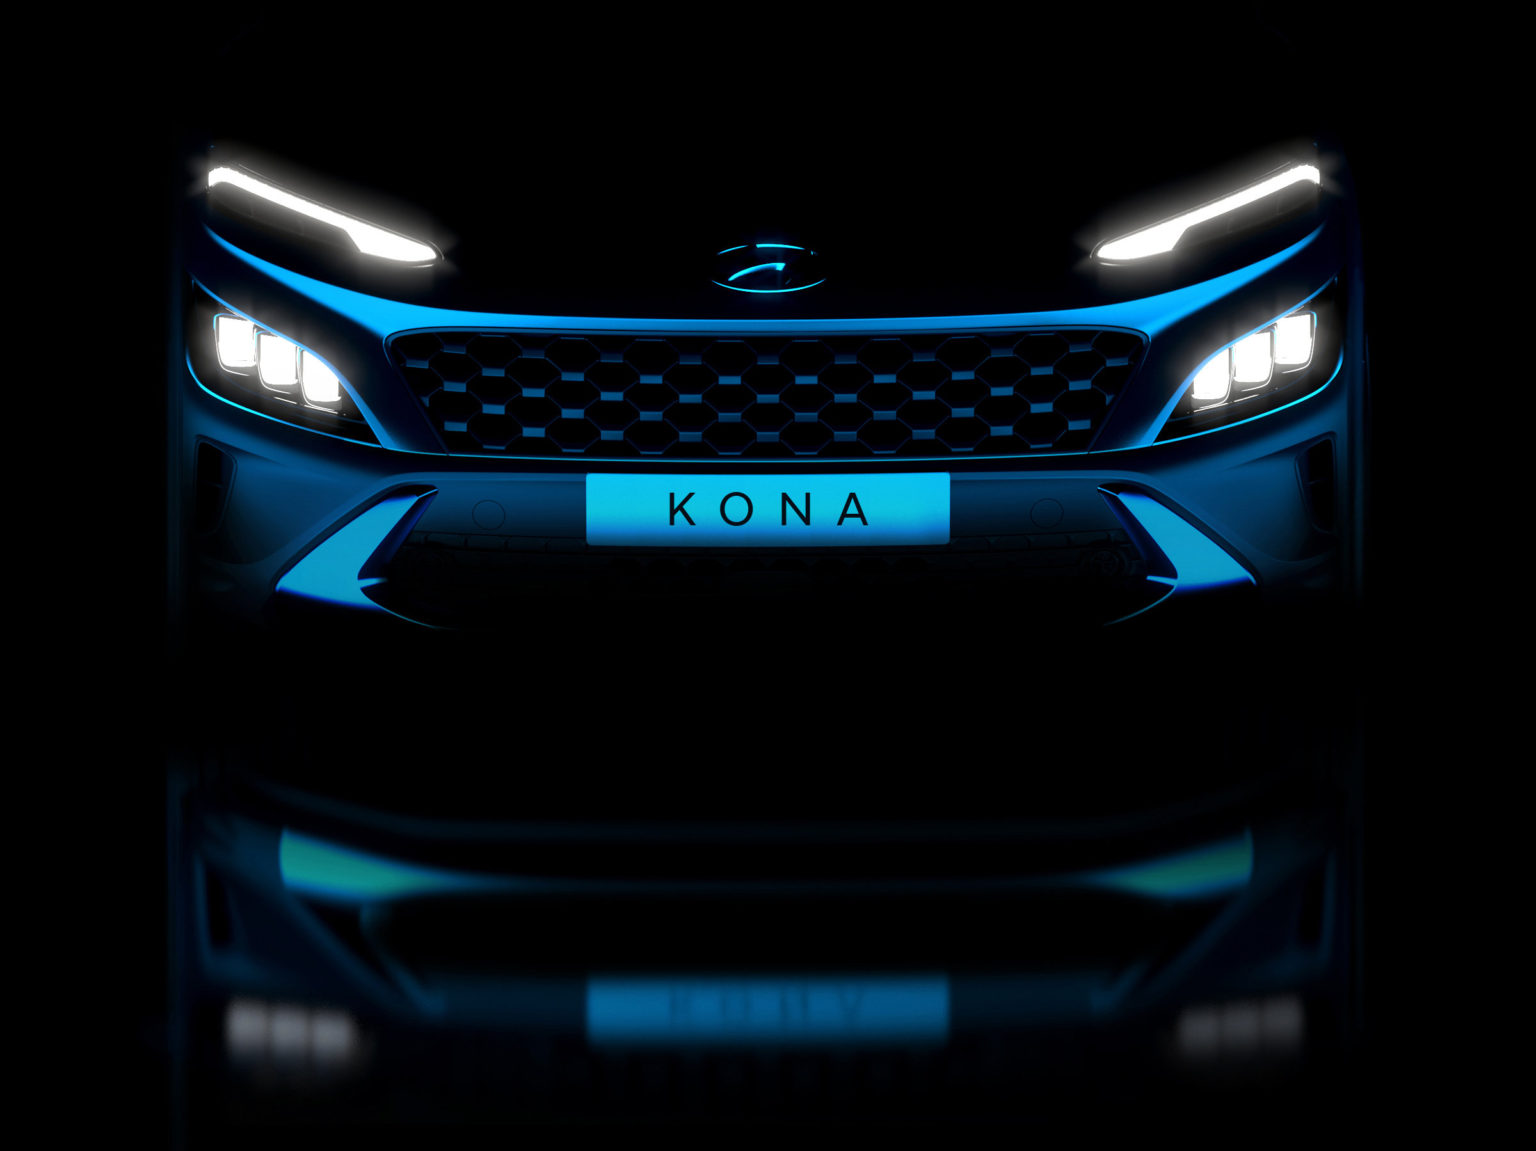 The award-winning Hyundai Kona will be refreshed for the 2022 model year.